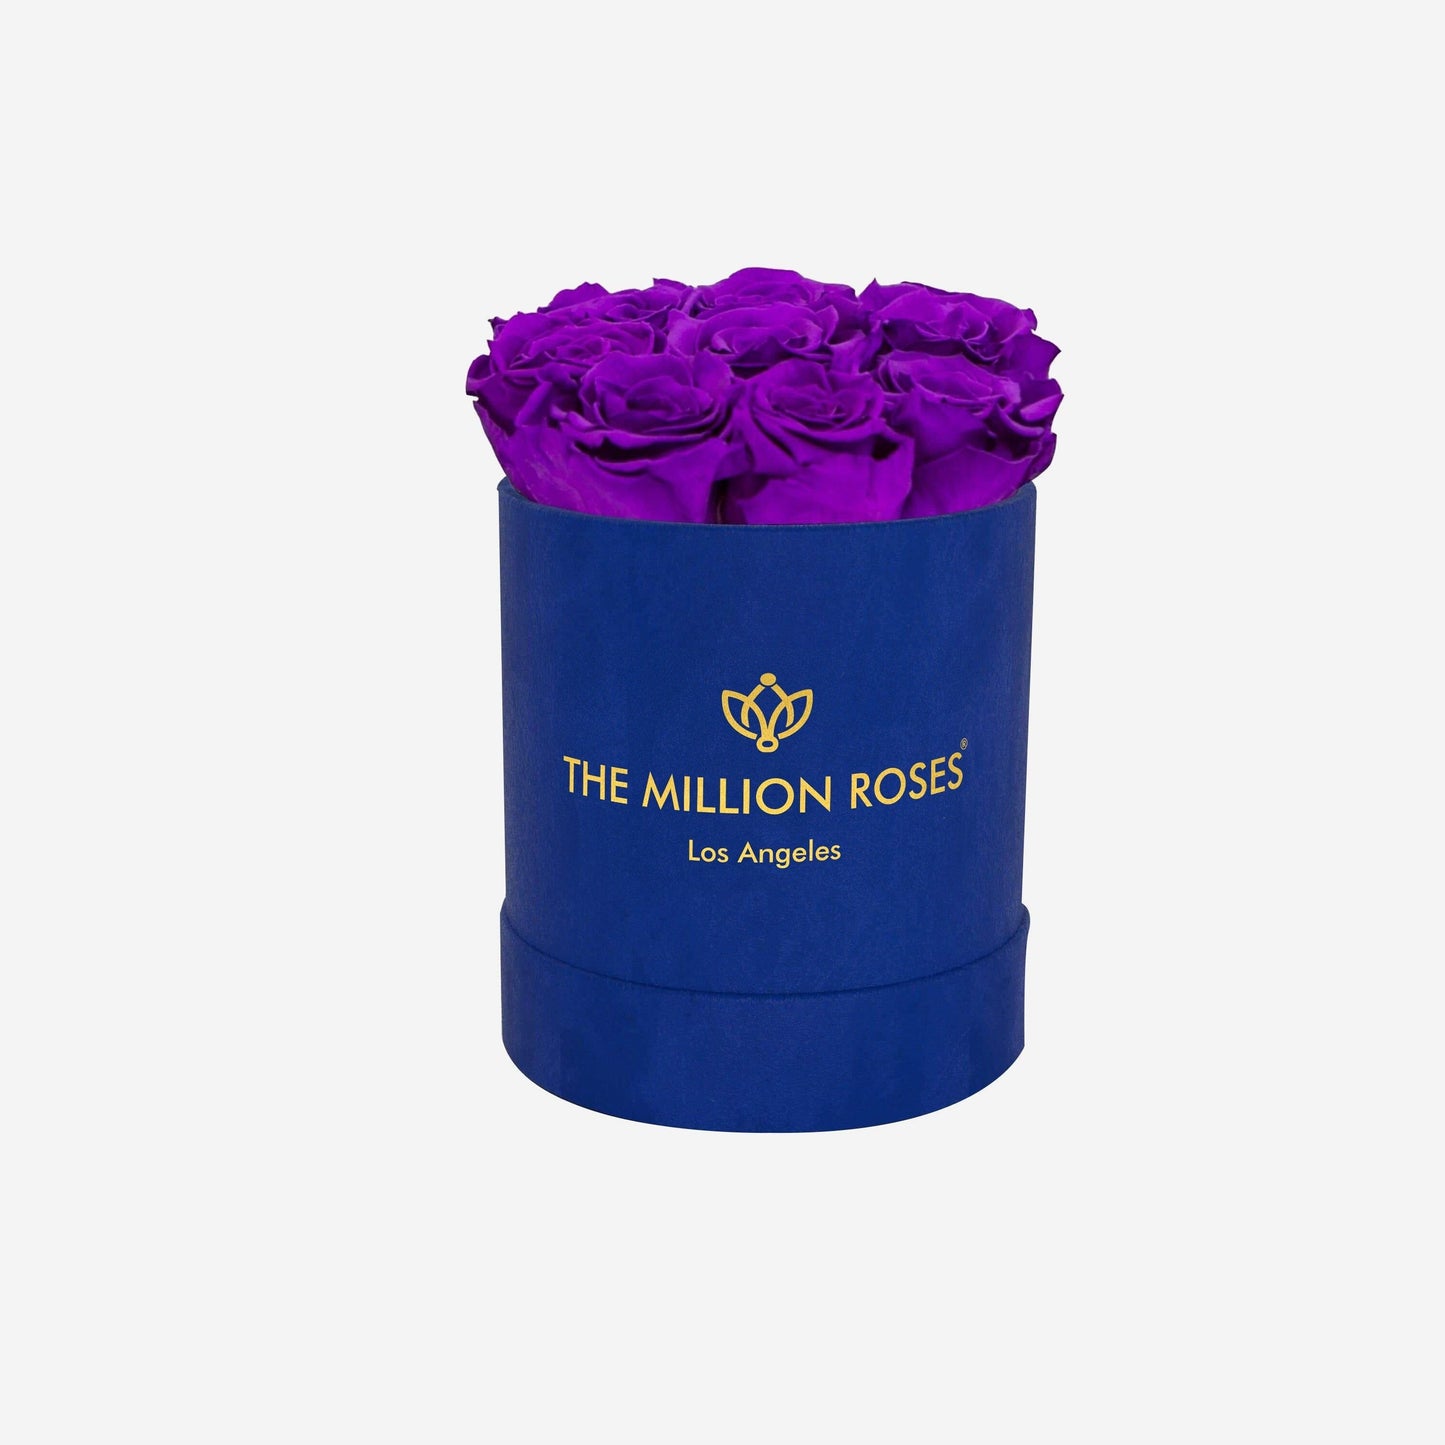 Basic Royal Blue Suede Box | Bright Purple Roses - The Million Roses